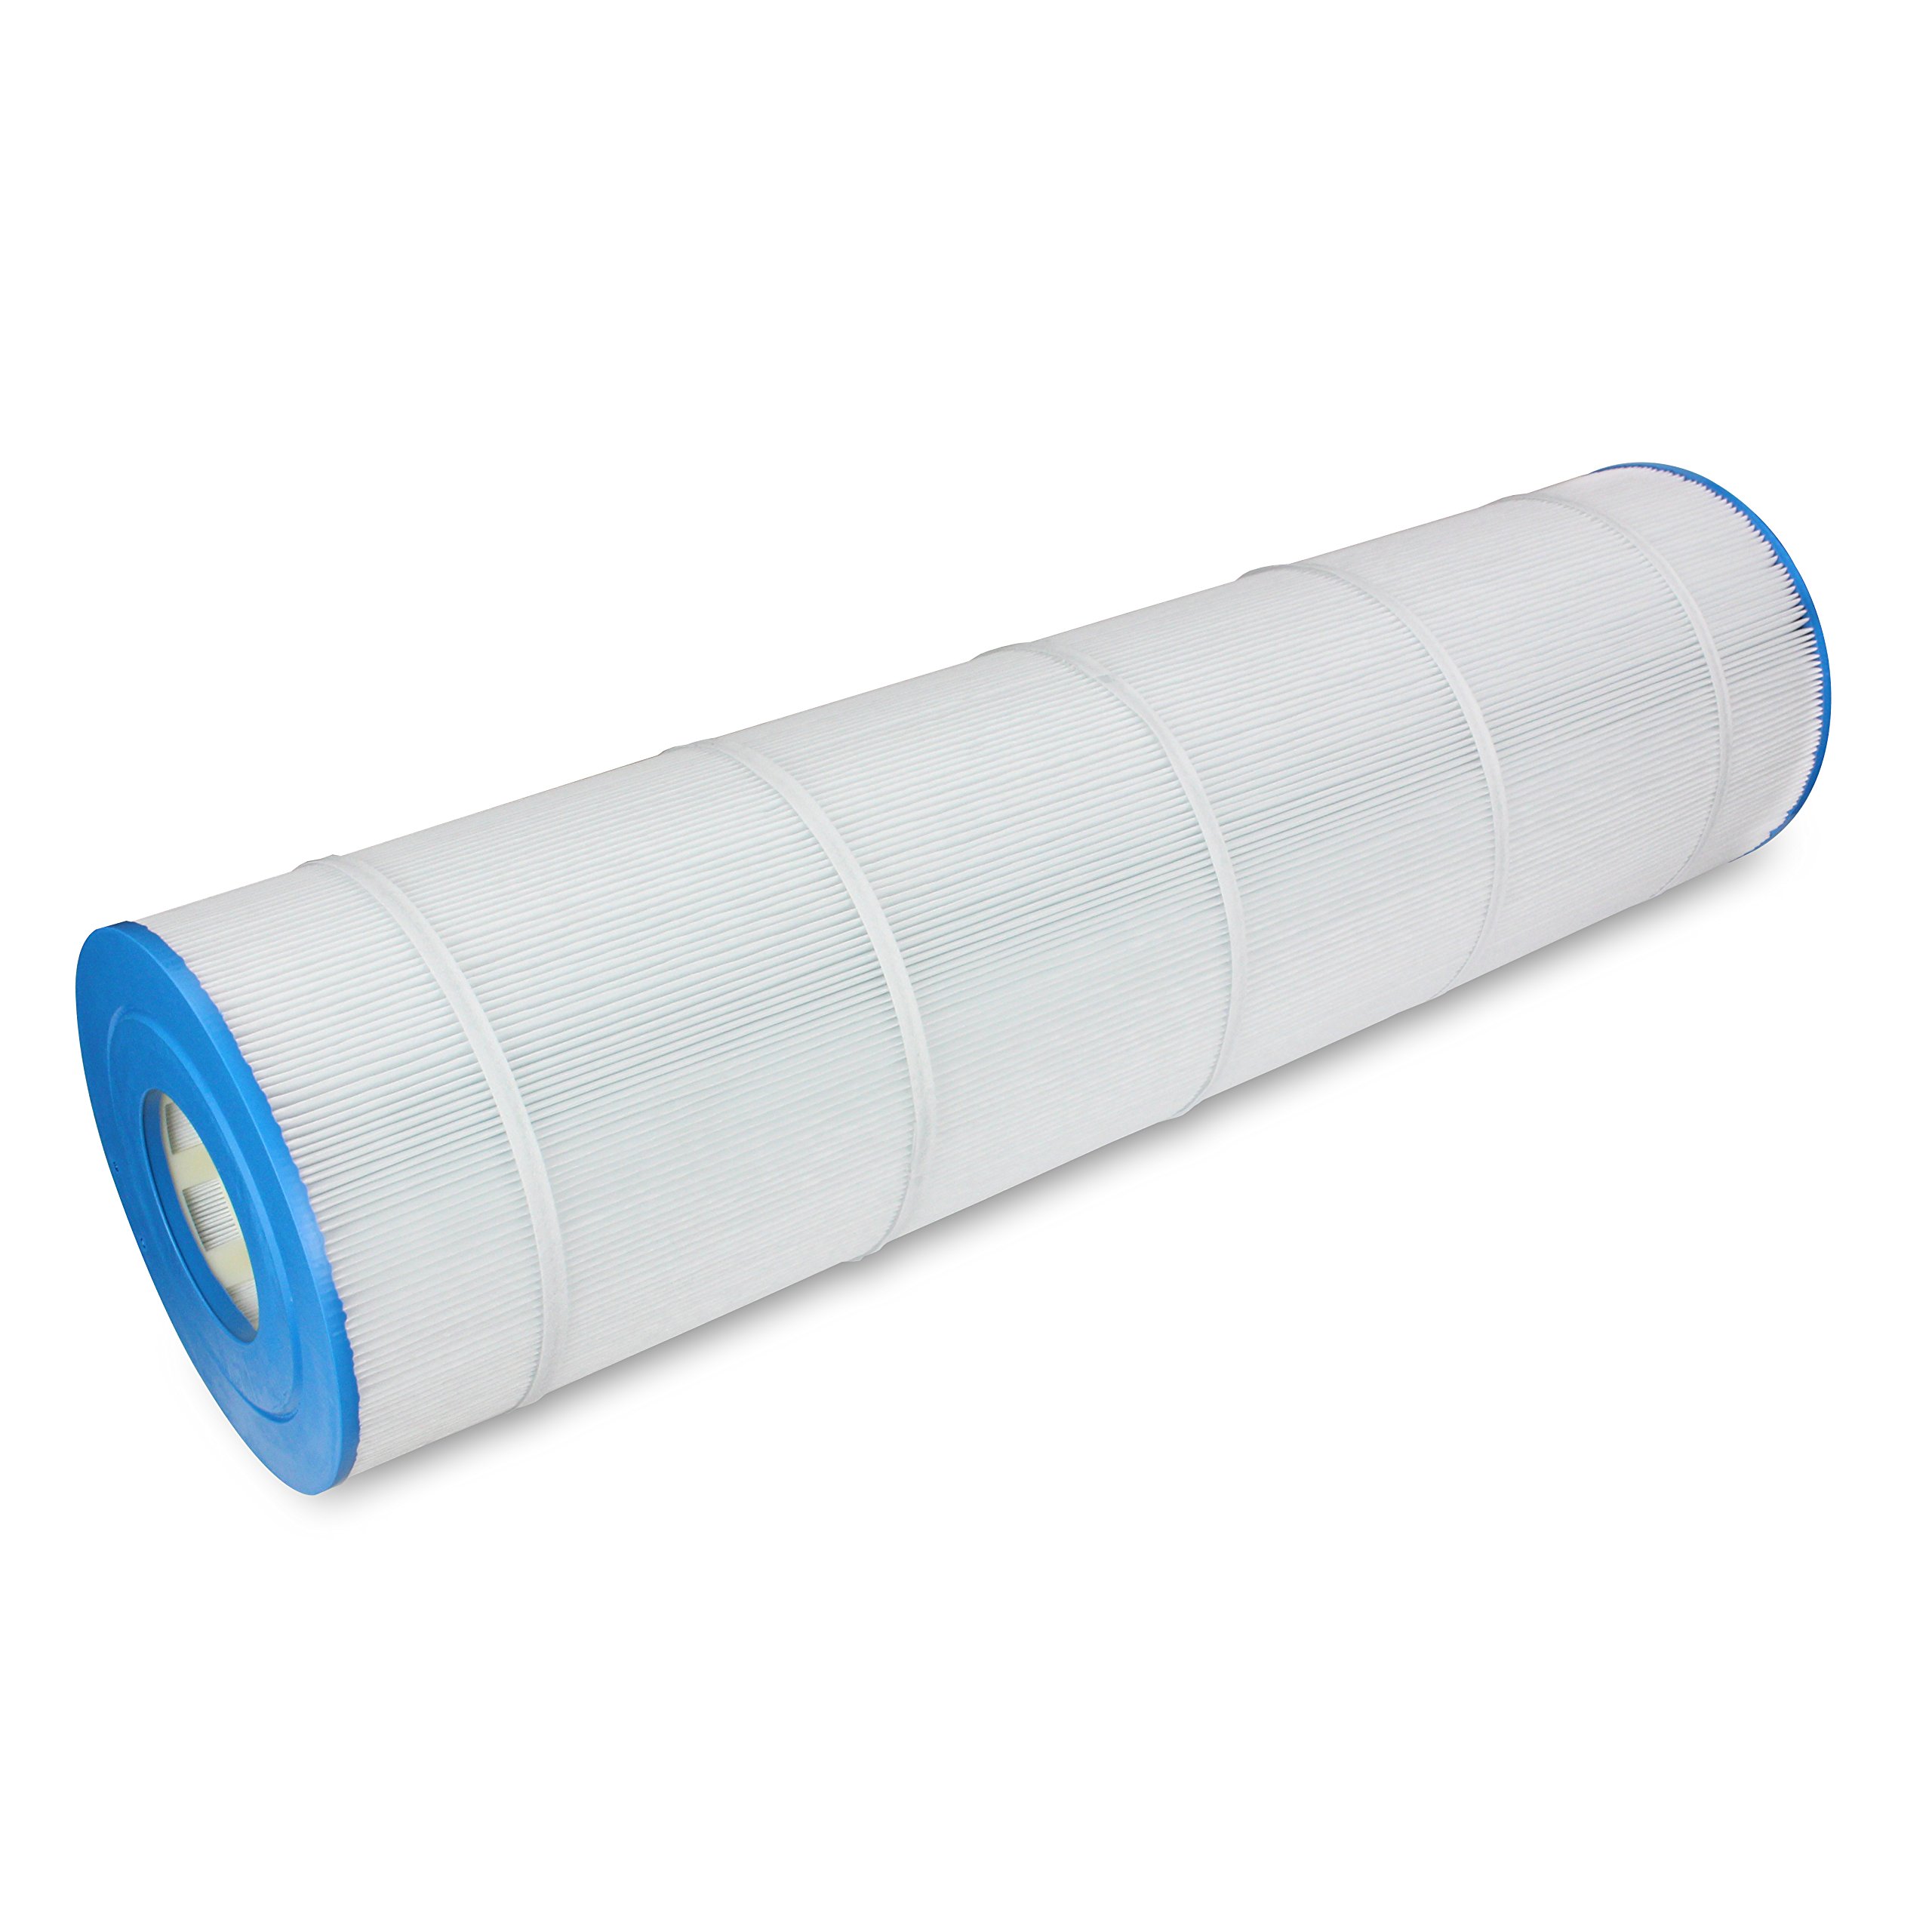 Pureline Pool Replacement Cartridge Filter, 200 Sq Ft, PL0127, Compatible with Jandy CS200